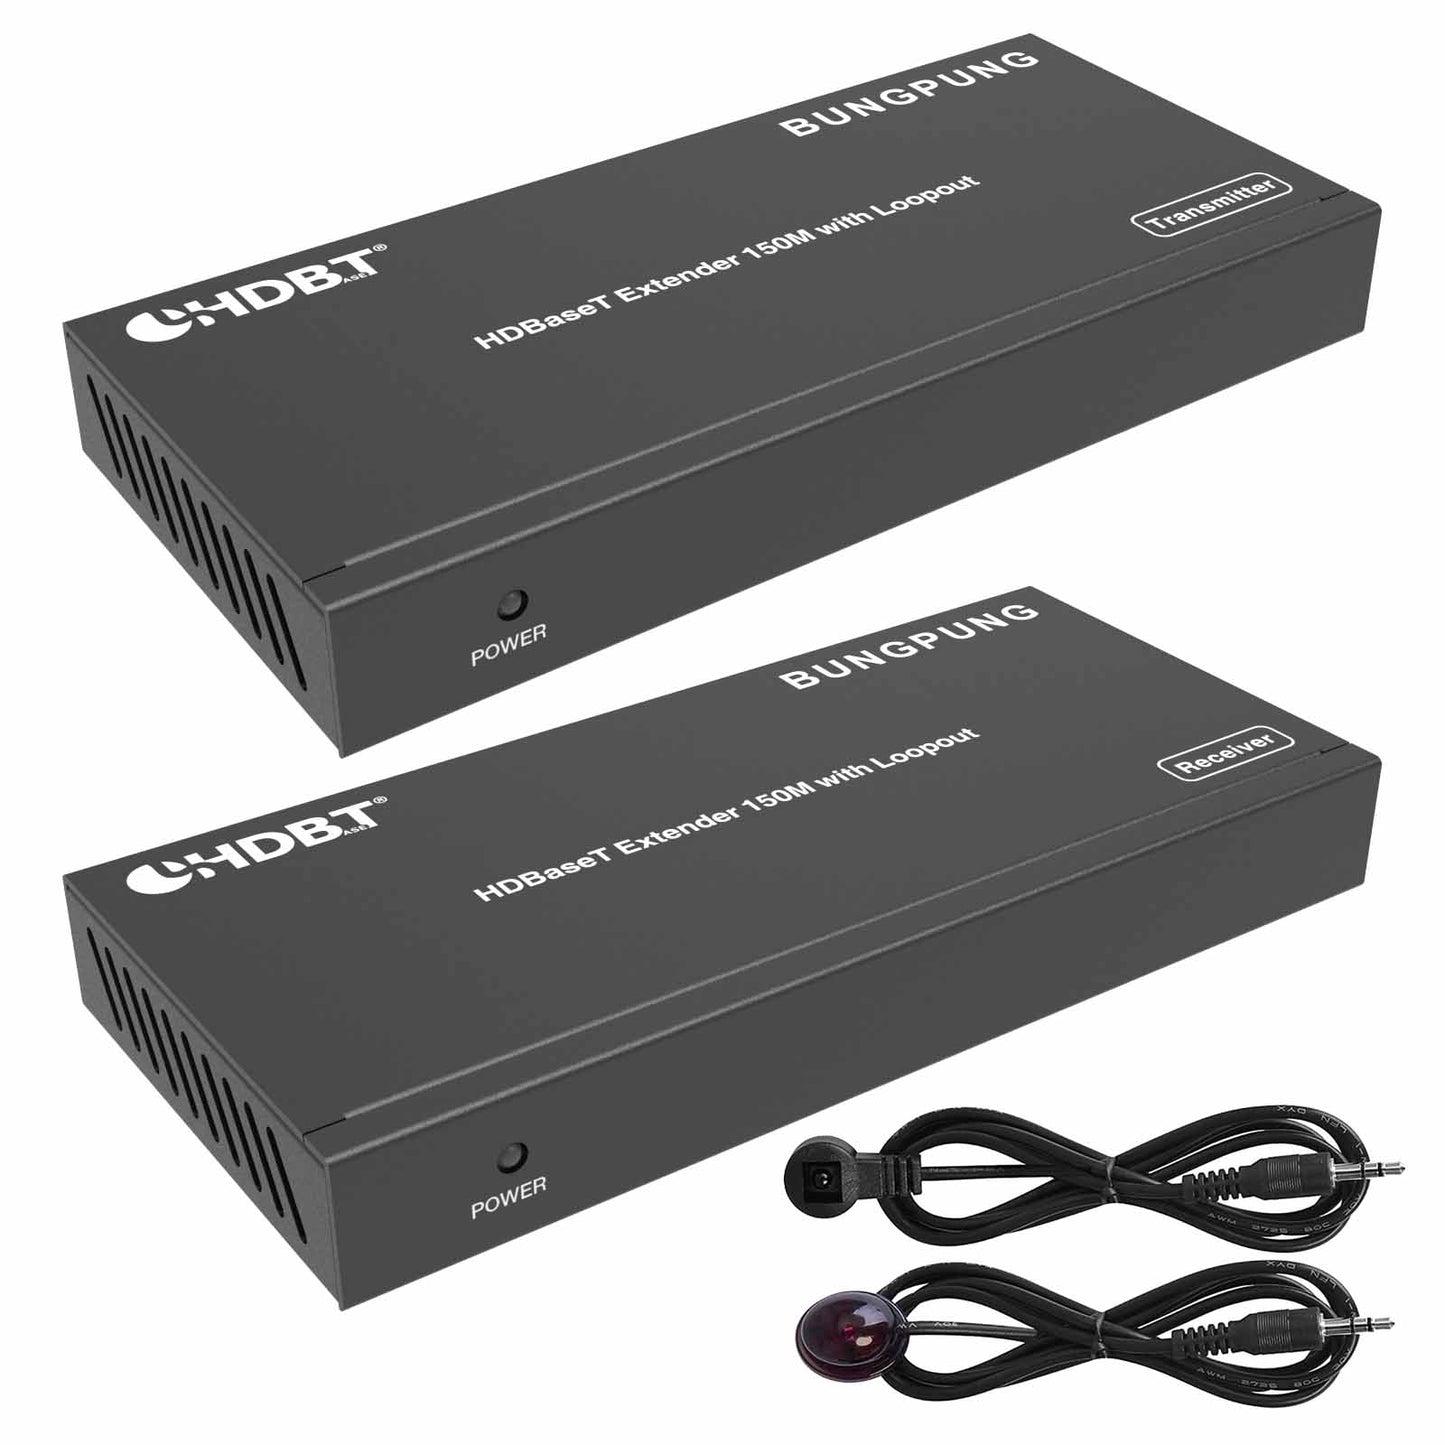 HDBaseT HDMI Extender over CAT6 Cable 1080P 150m main 2